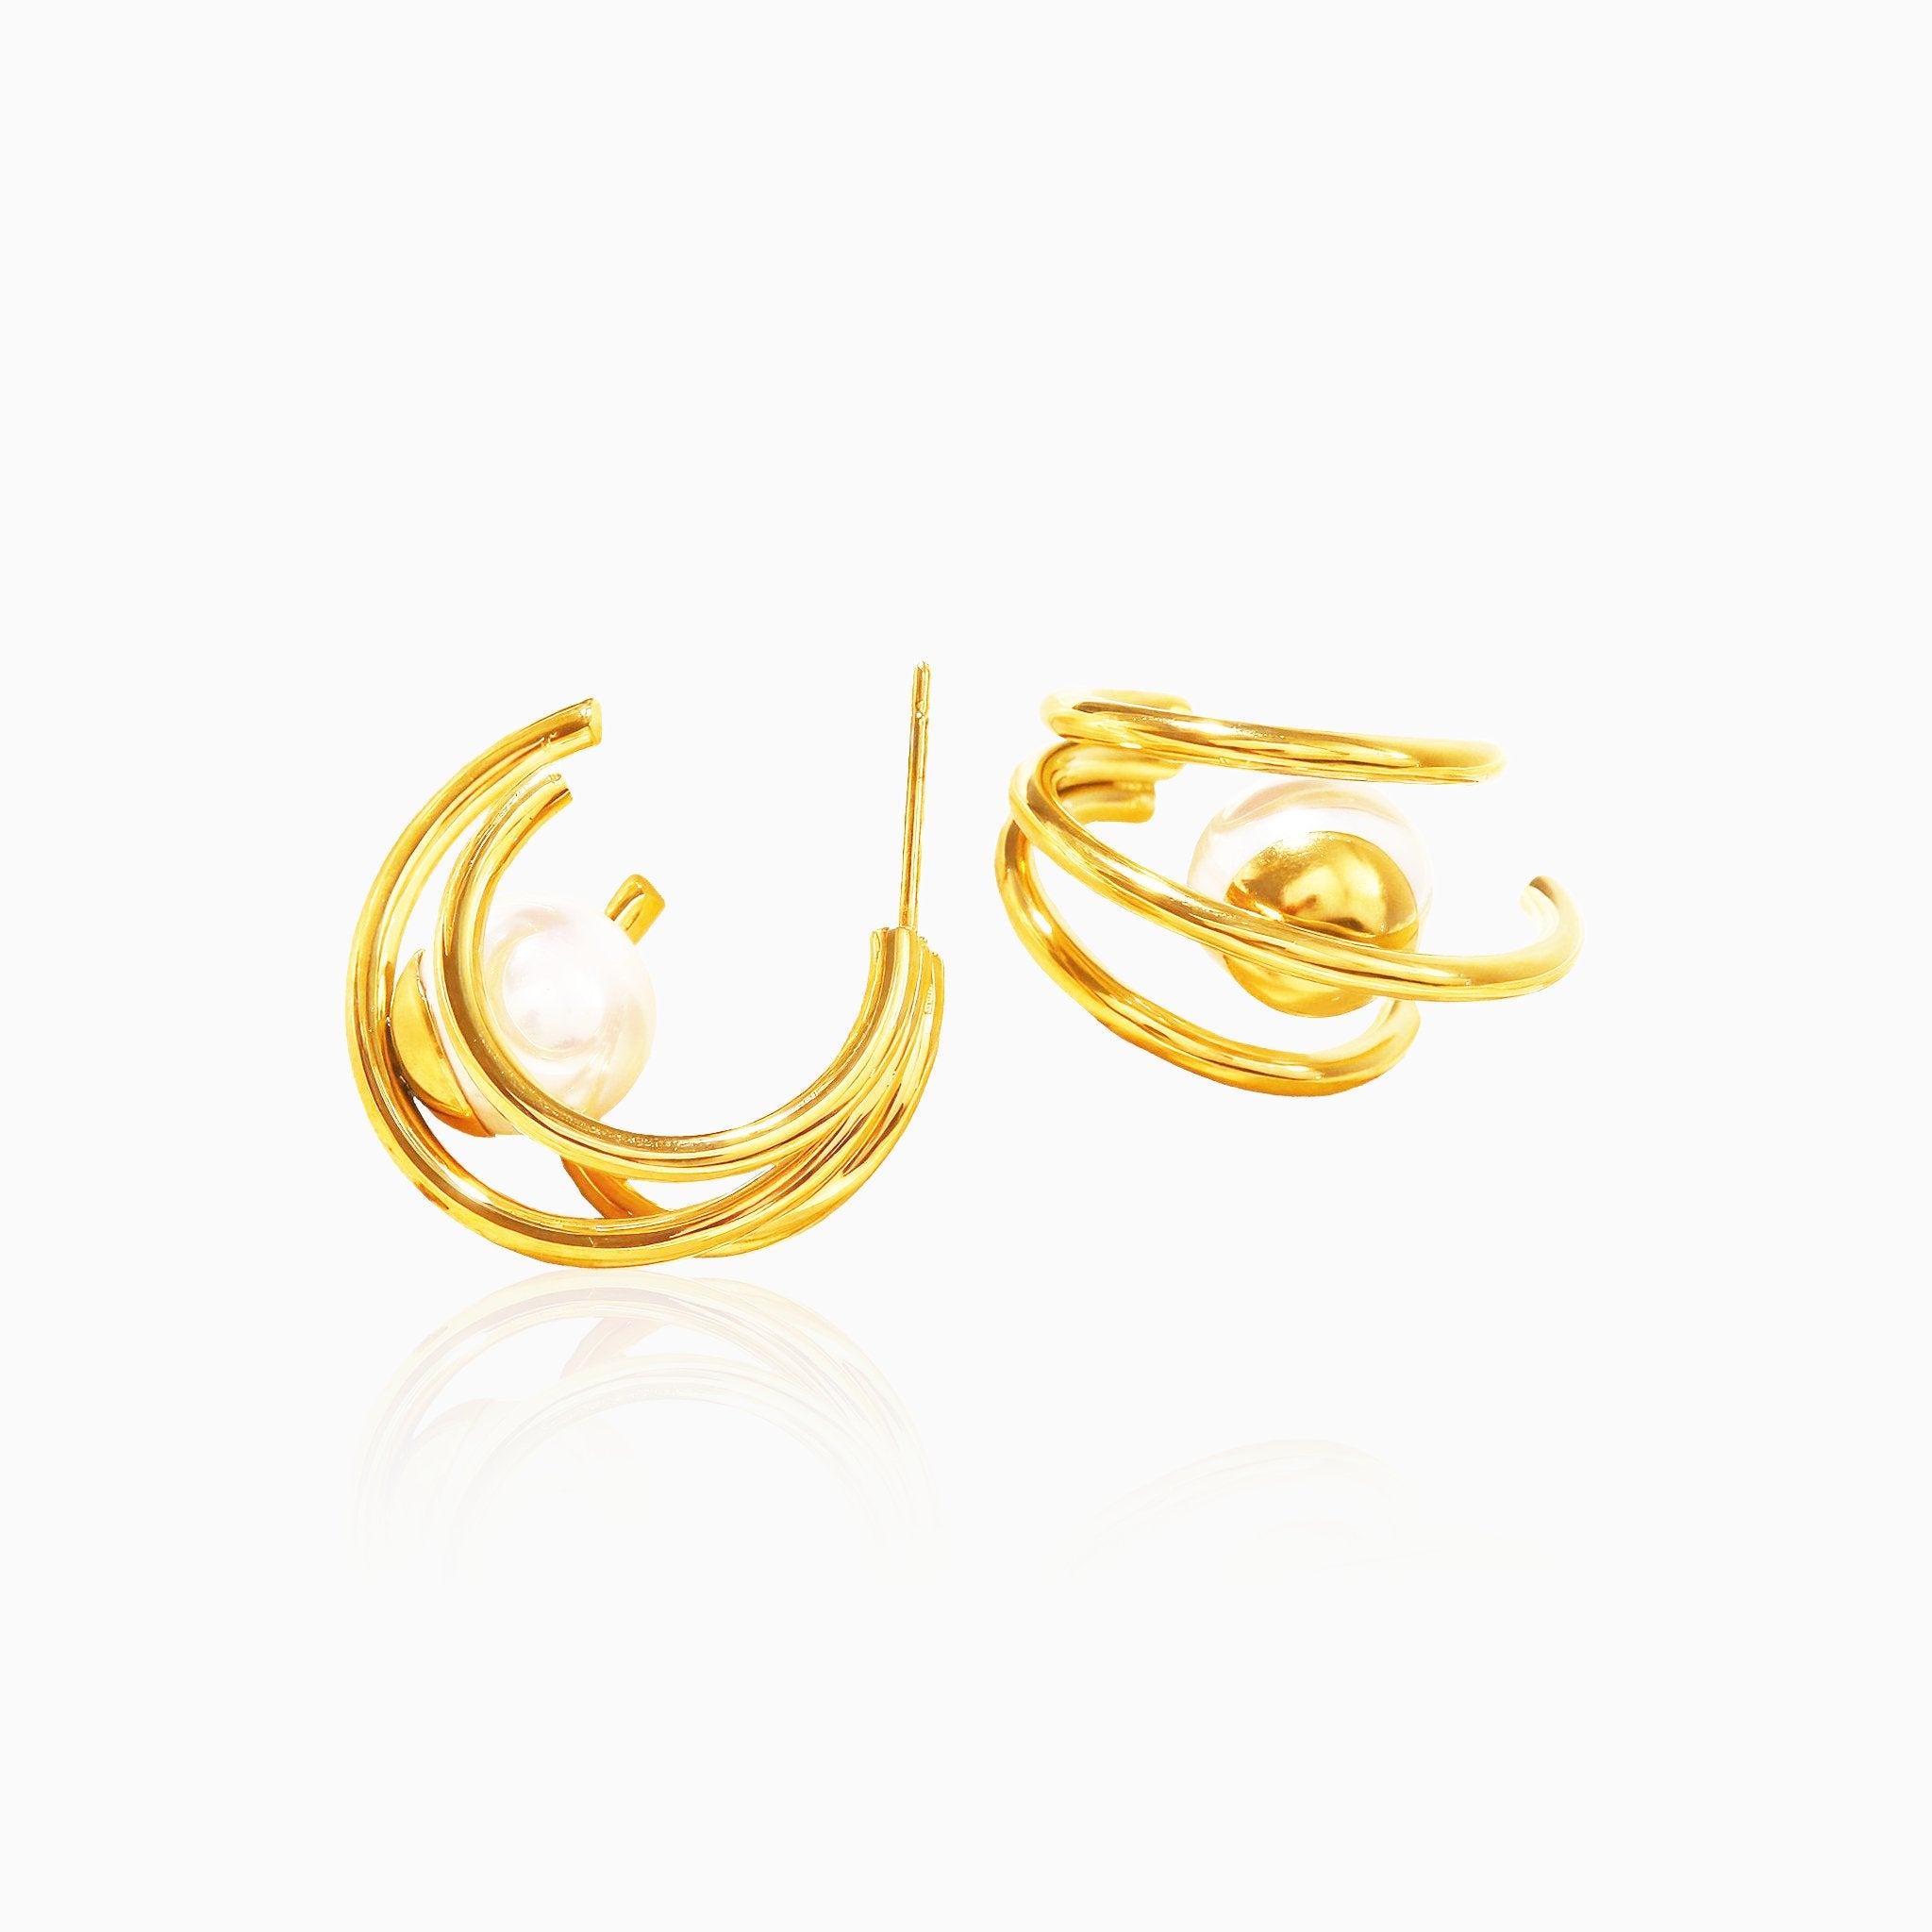 Pearl C-Shape Earrings - Nobbier - Earrings - 18K Gold And Titanium PVD Coated Jewelry